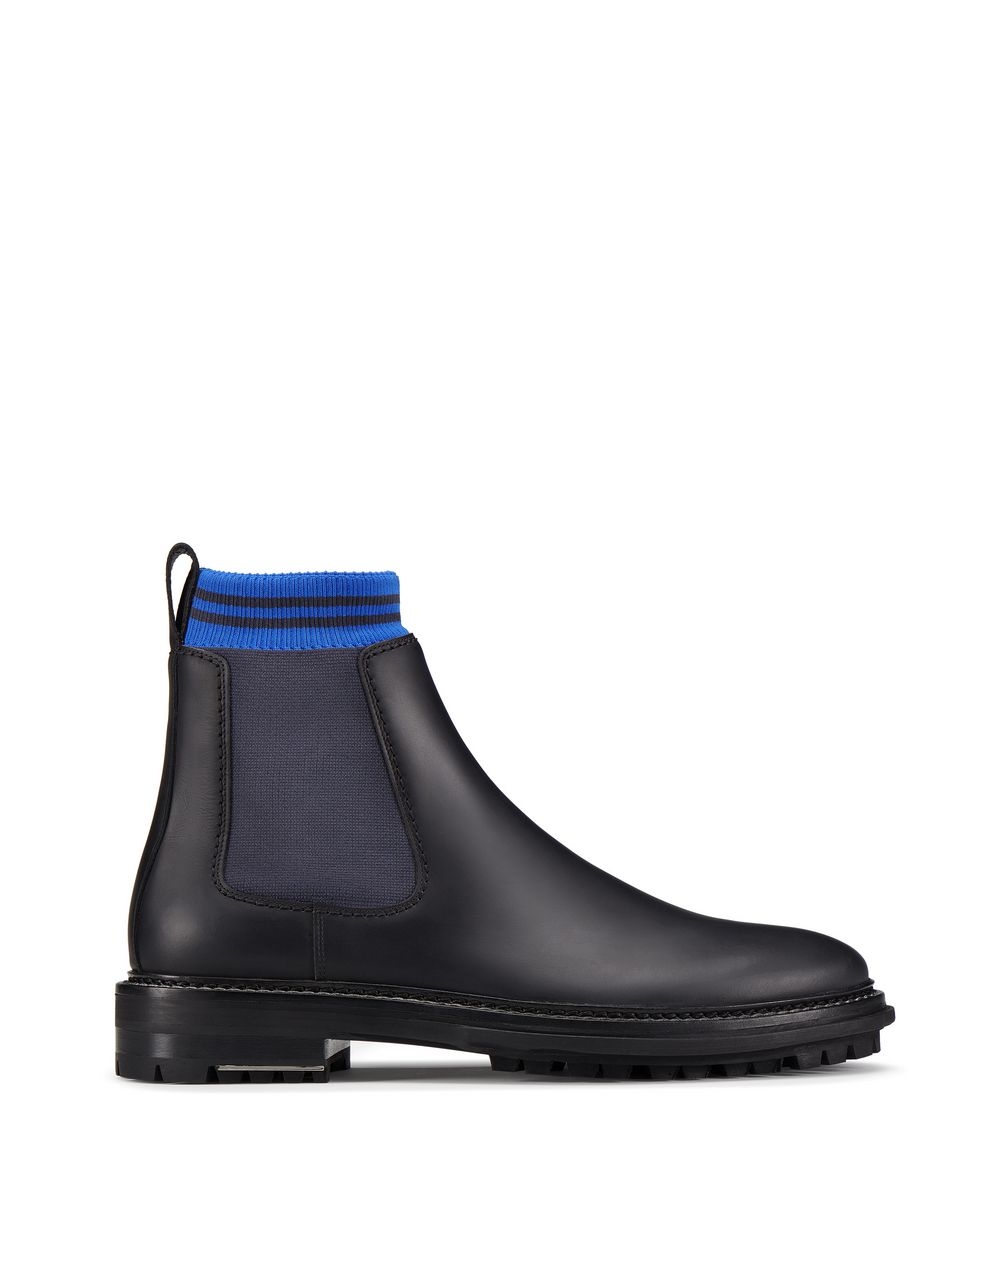 the chelsea boot store